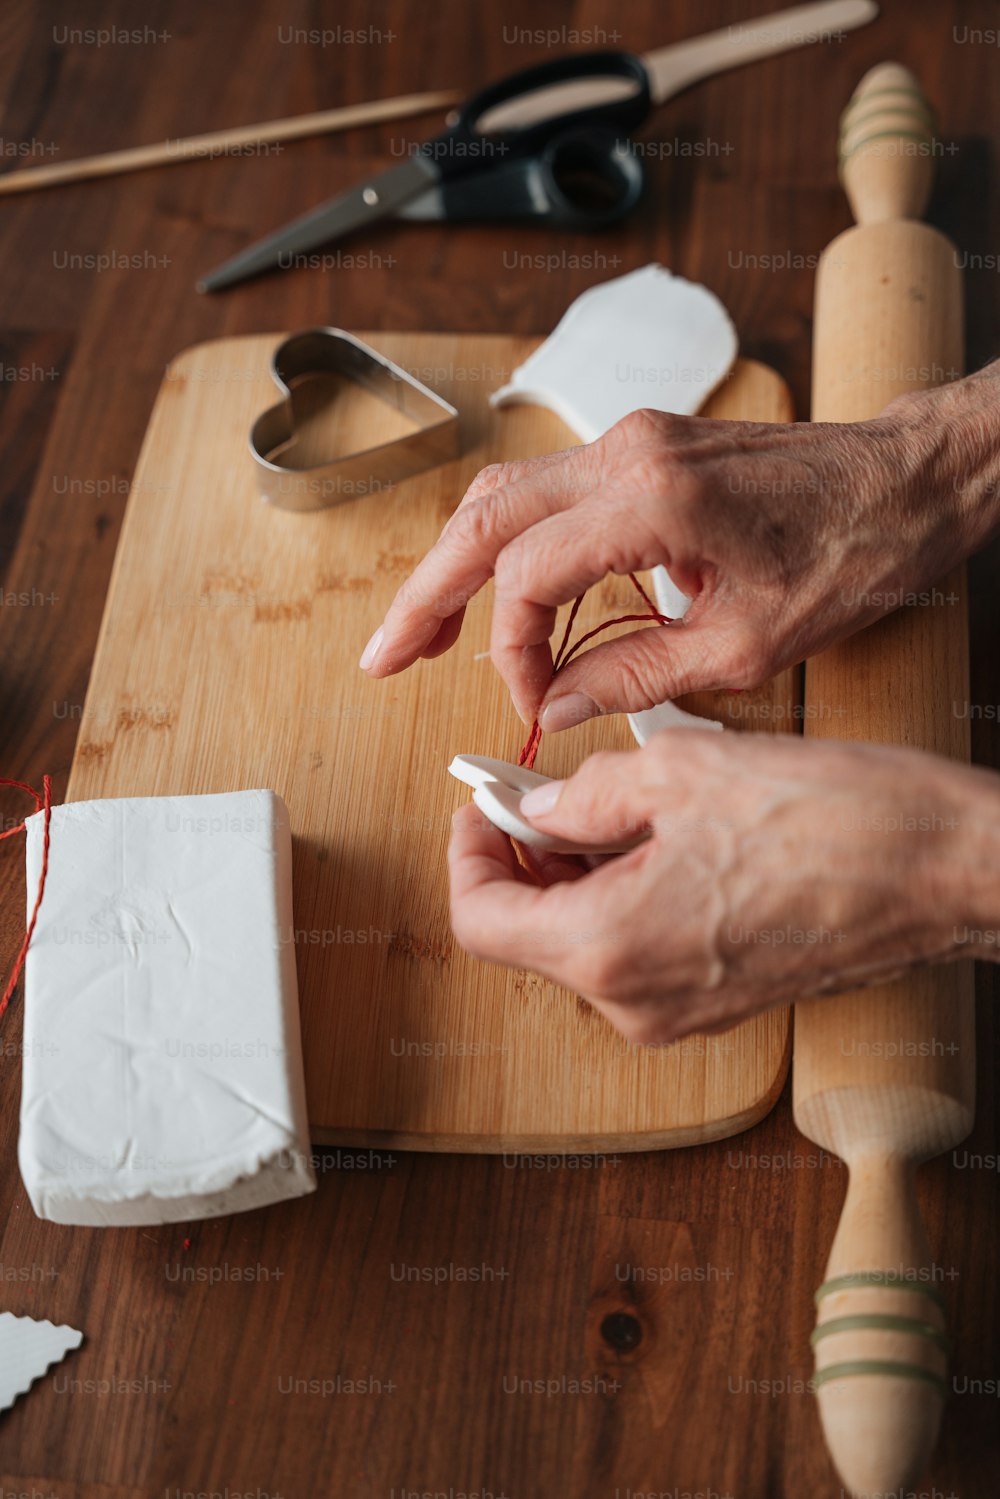 a person using a cell phone on a cutting board